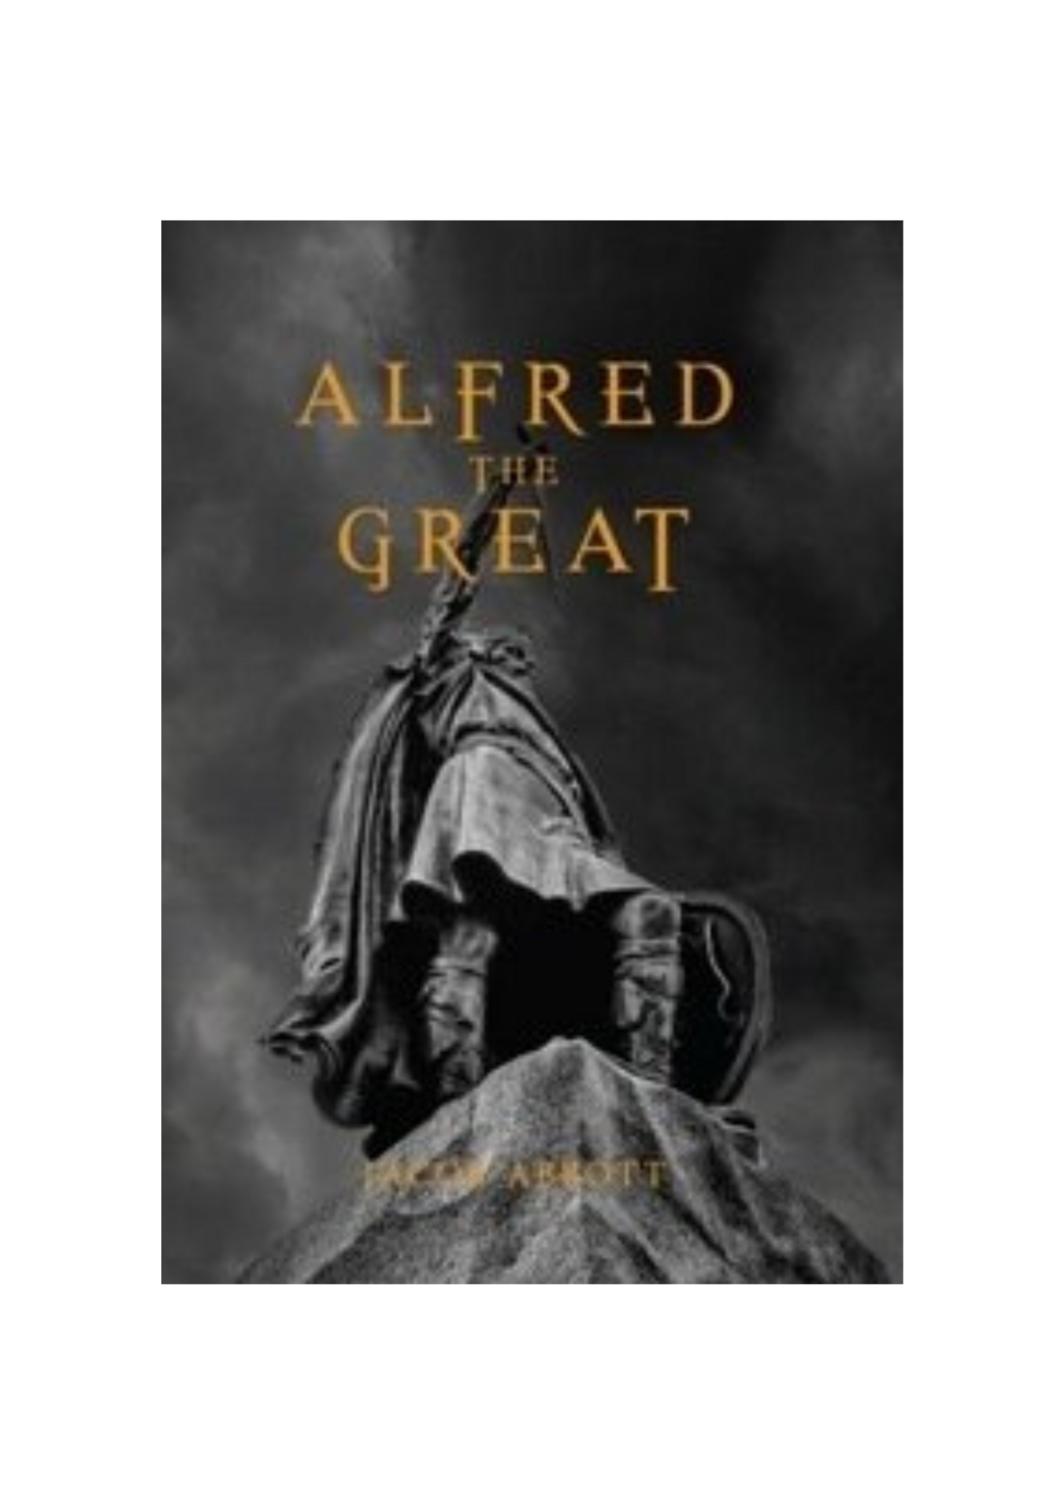 Alfred the Great (1849)